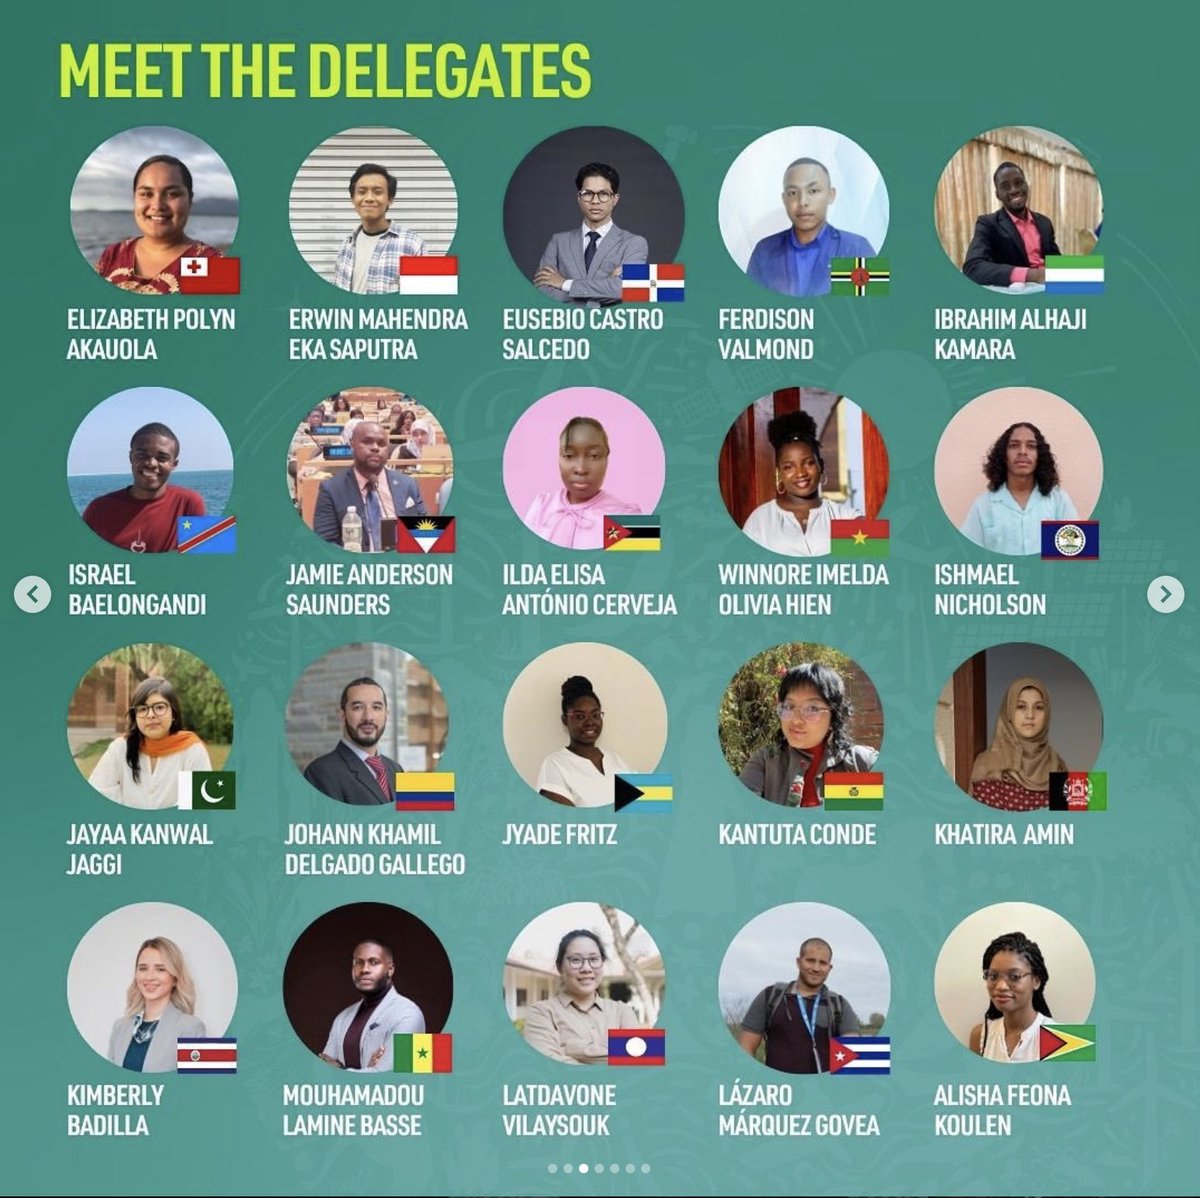 A huge congratulations to @jkdelgadog for being selected a #COP28 International #YouthClimateDelegate cop28.com/en/youth-deleg…. 100 were selected from over 11,000 applicants! #UNFCCC @CEECornell @CornellEng @AtkinsonCenter @Cornell @CornellBirds